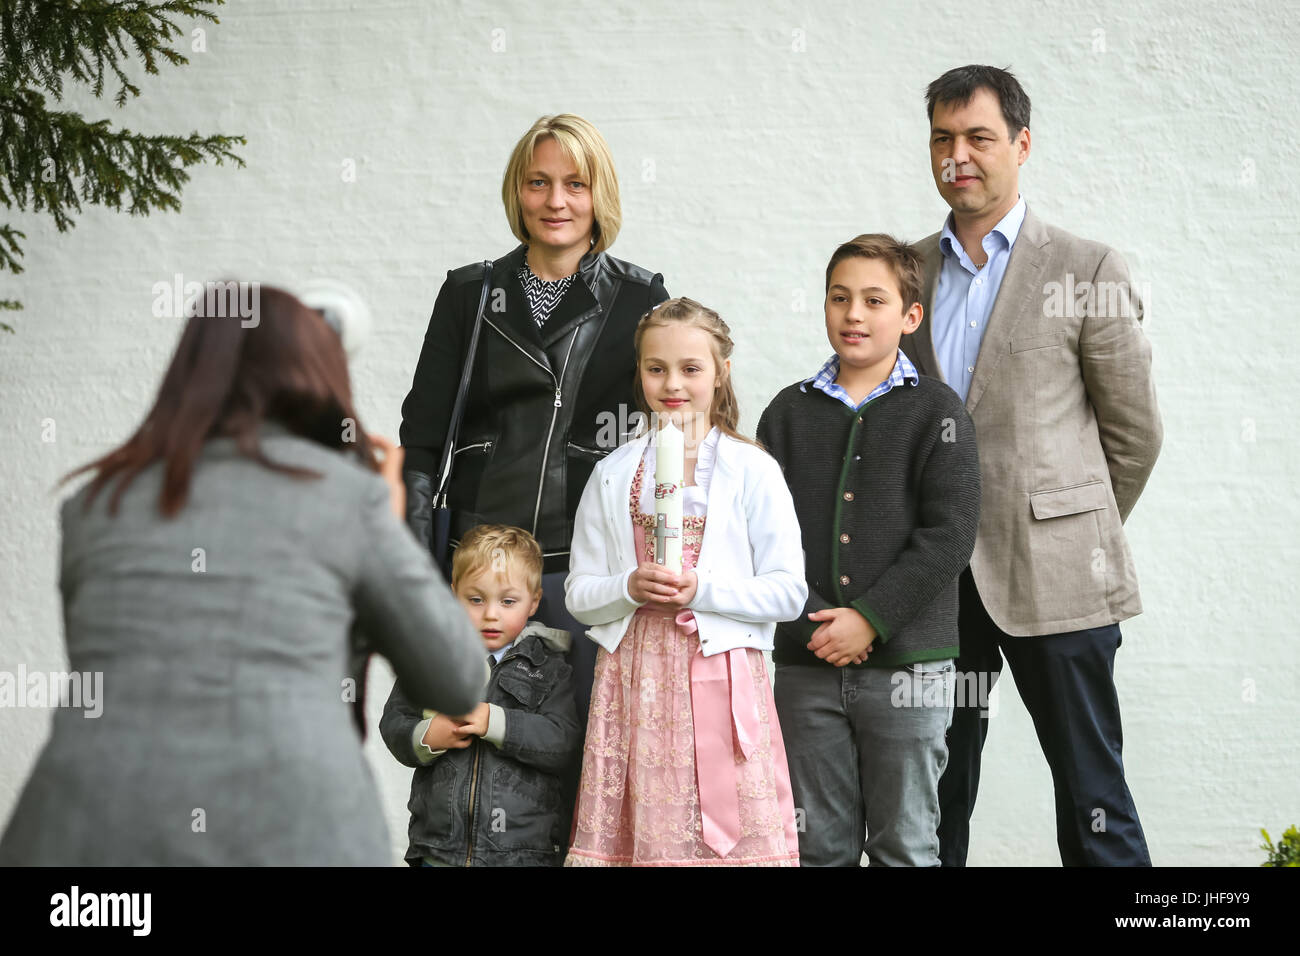 NANDLSTADT, GERMANY - MAY 7, 2017 : A young girl with candle posing with her family to a photographer at the first communion in Nandlstadt, Germany. Stock Photo